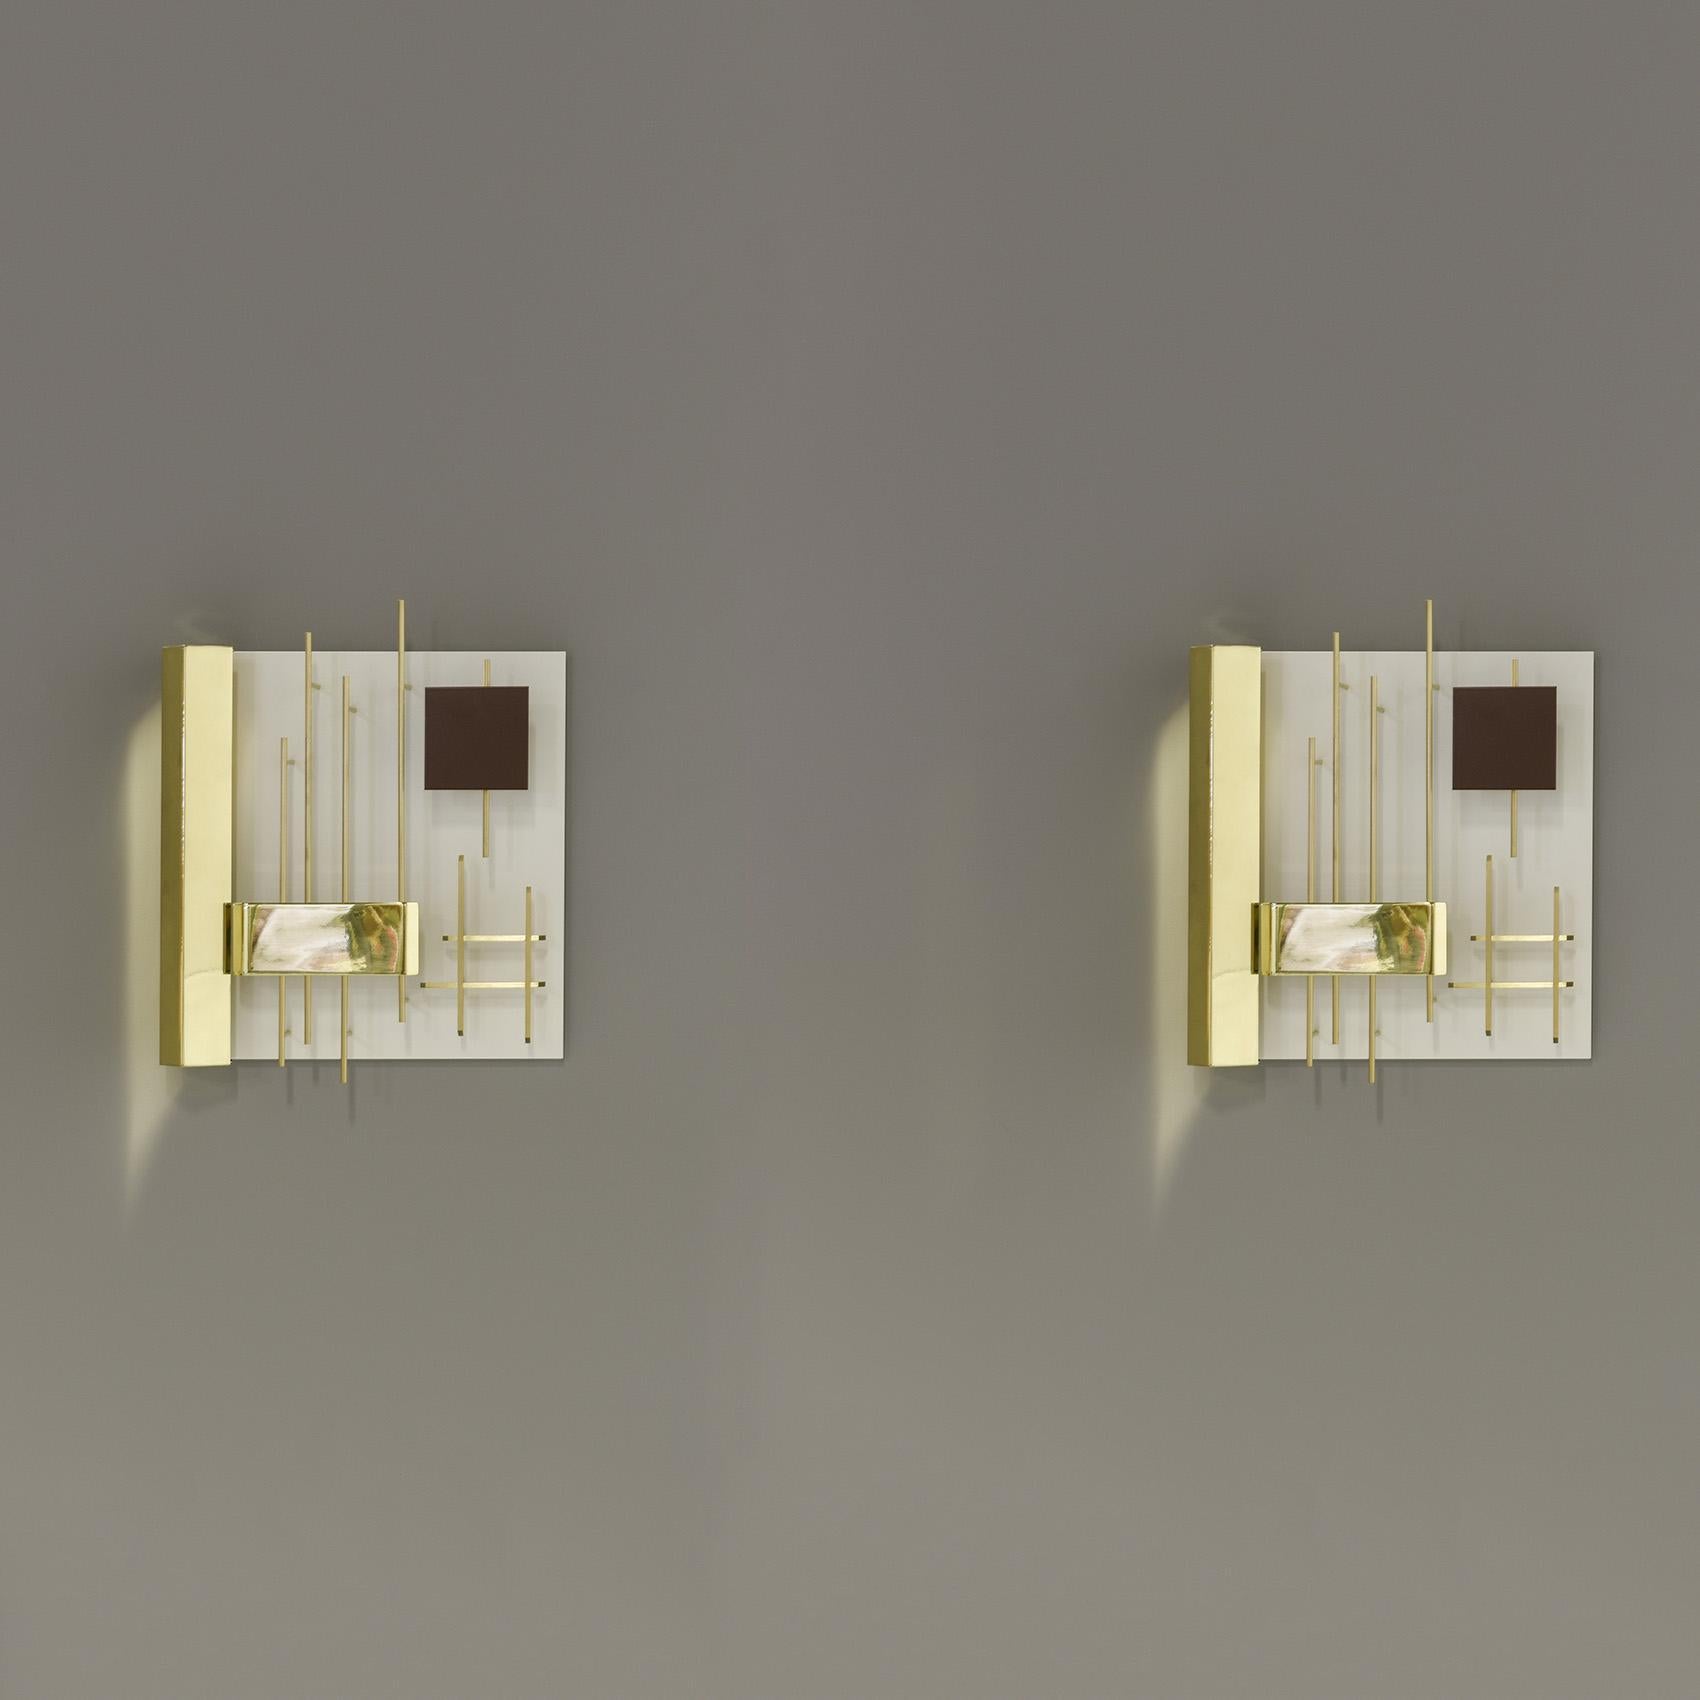 Elegant and graphic pair of square sconces by Gio Ponti. Brass and lacquered metal.
Model 575 for Lumi, Milano.
Creation date 1960.

Bibliography : 
- Ugo la Pietra, 